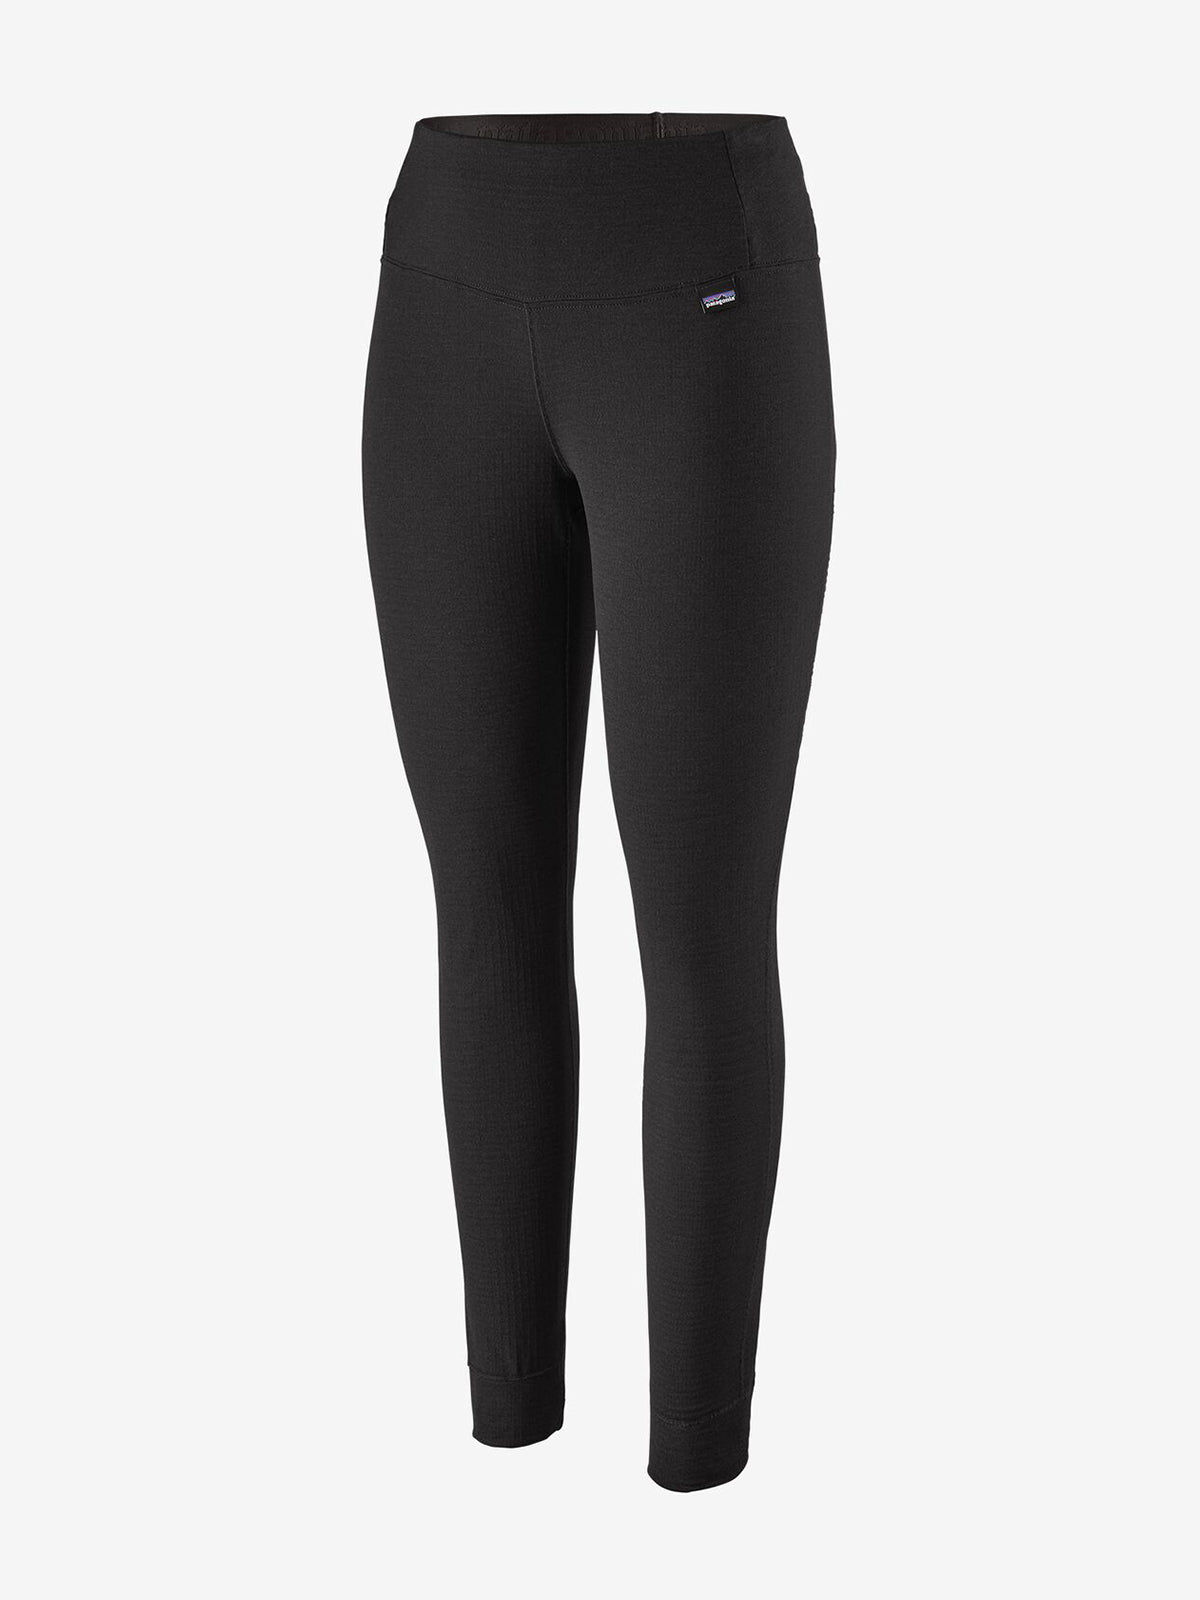 Patagonia Womens CAPILENE THERMAL WEIGHT BOTTOMS